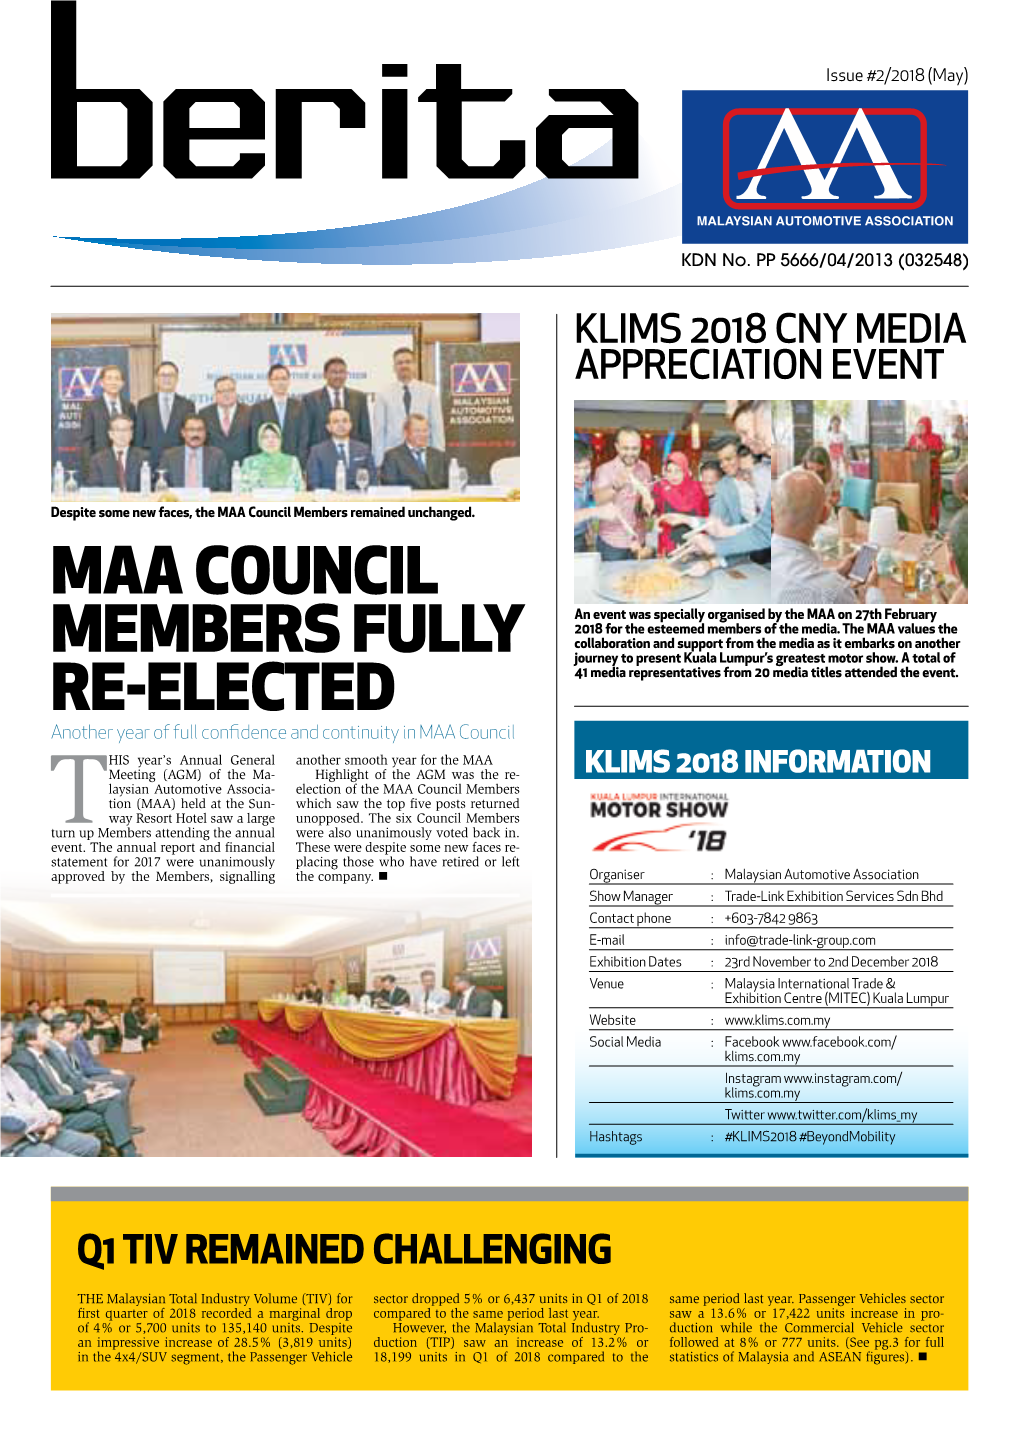 Maa Council Members Fully Re-Elected